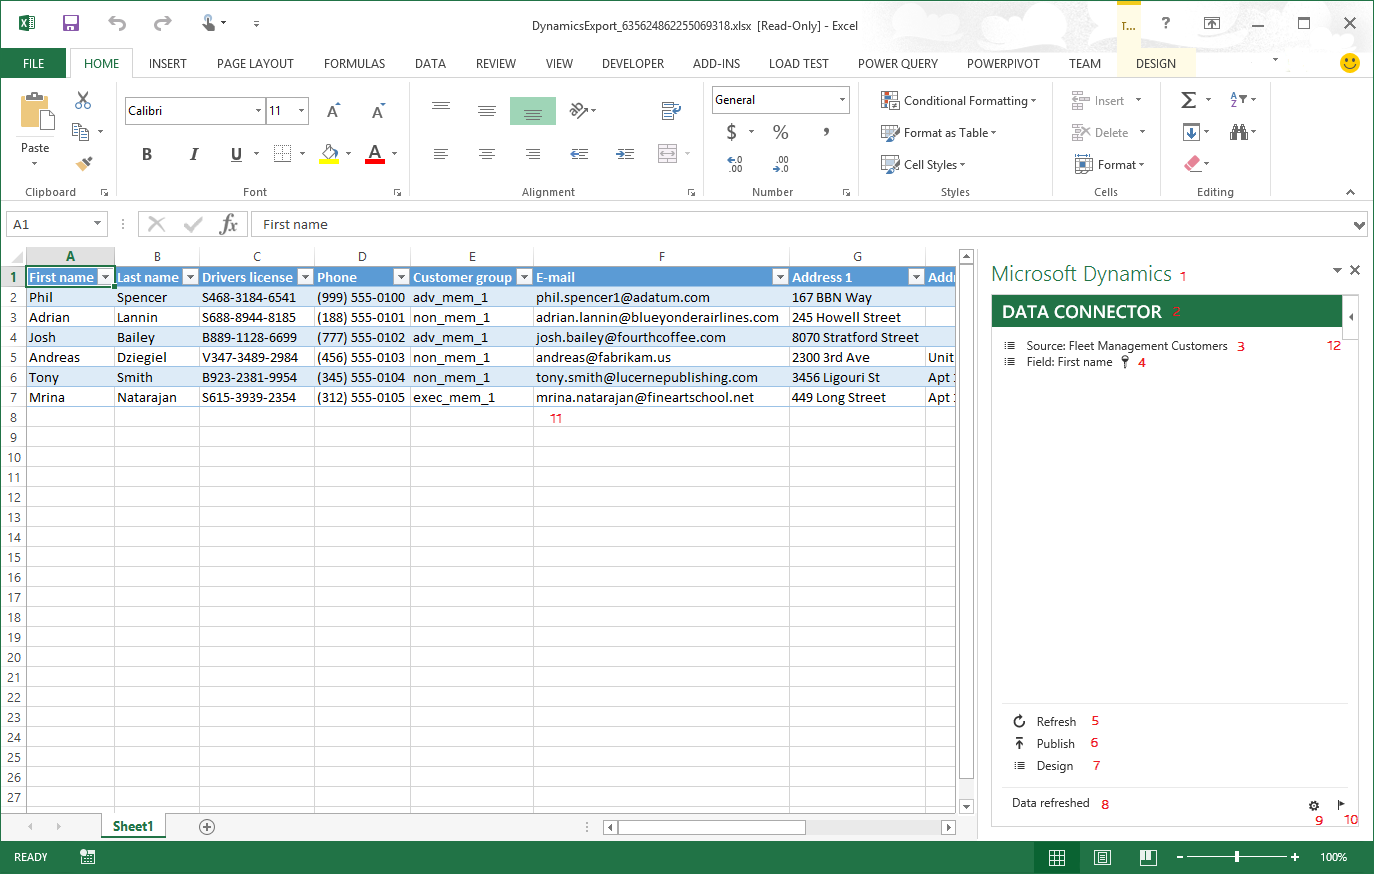 Screen shot showing location of Excel Data Connector app with numbered elements corresponding to table.